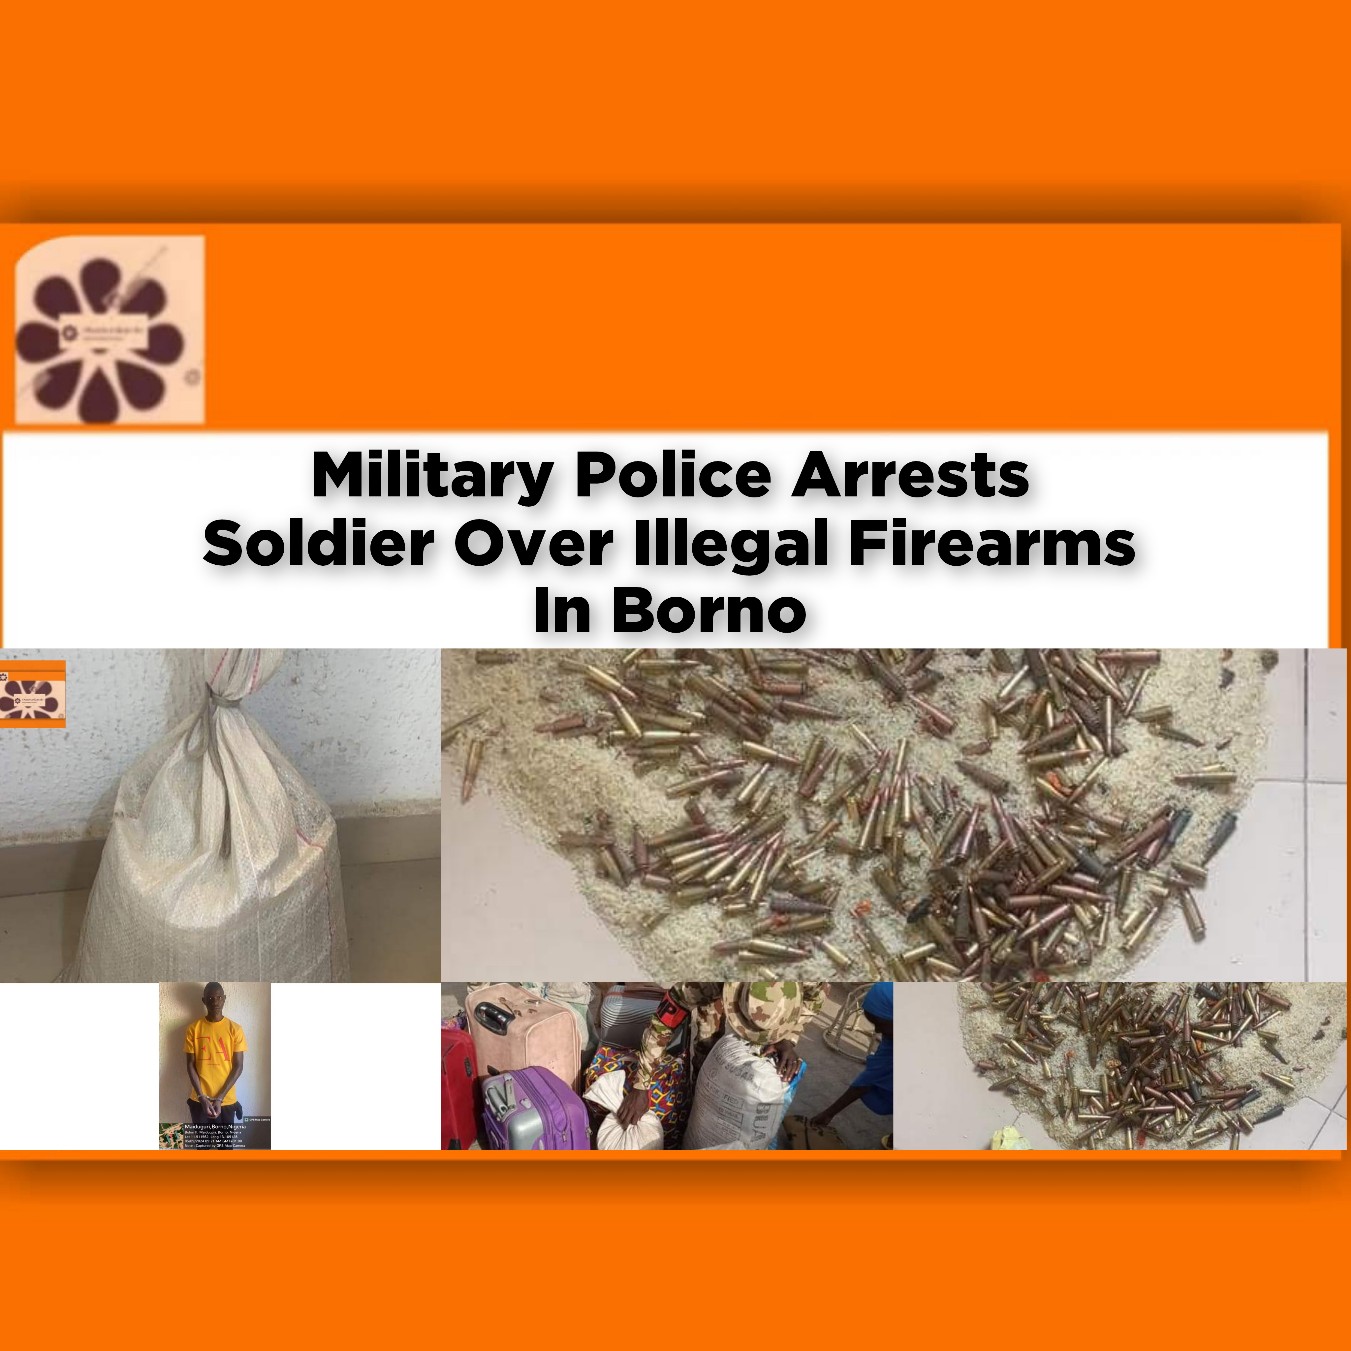 Military Police Arrests Soldier Over Illegal Firearms In Borno ~ OsazuwaAkonedo #Goodwin